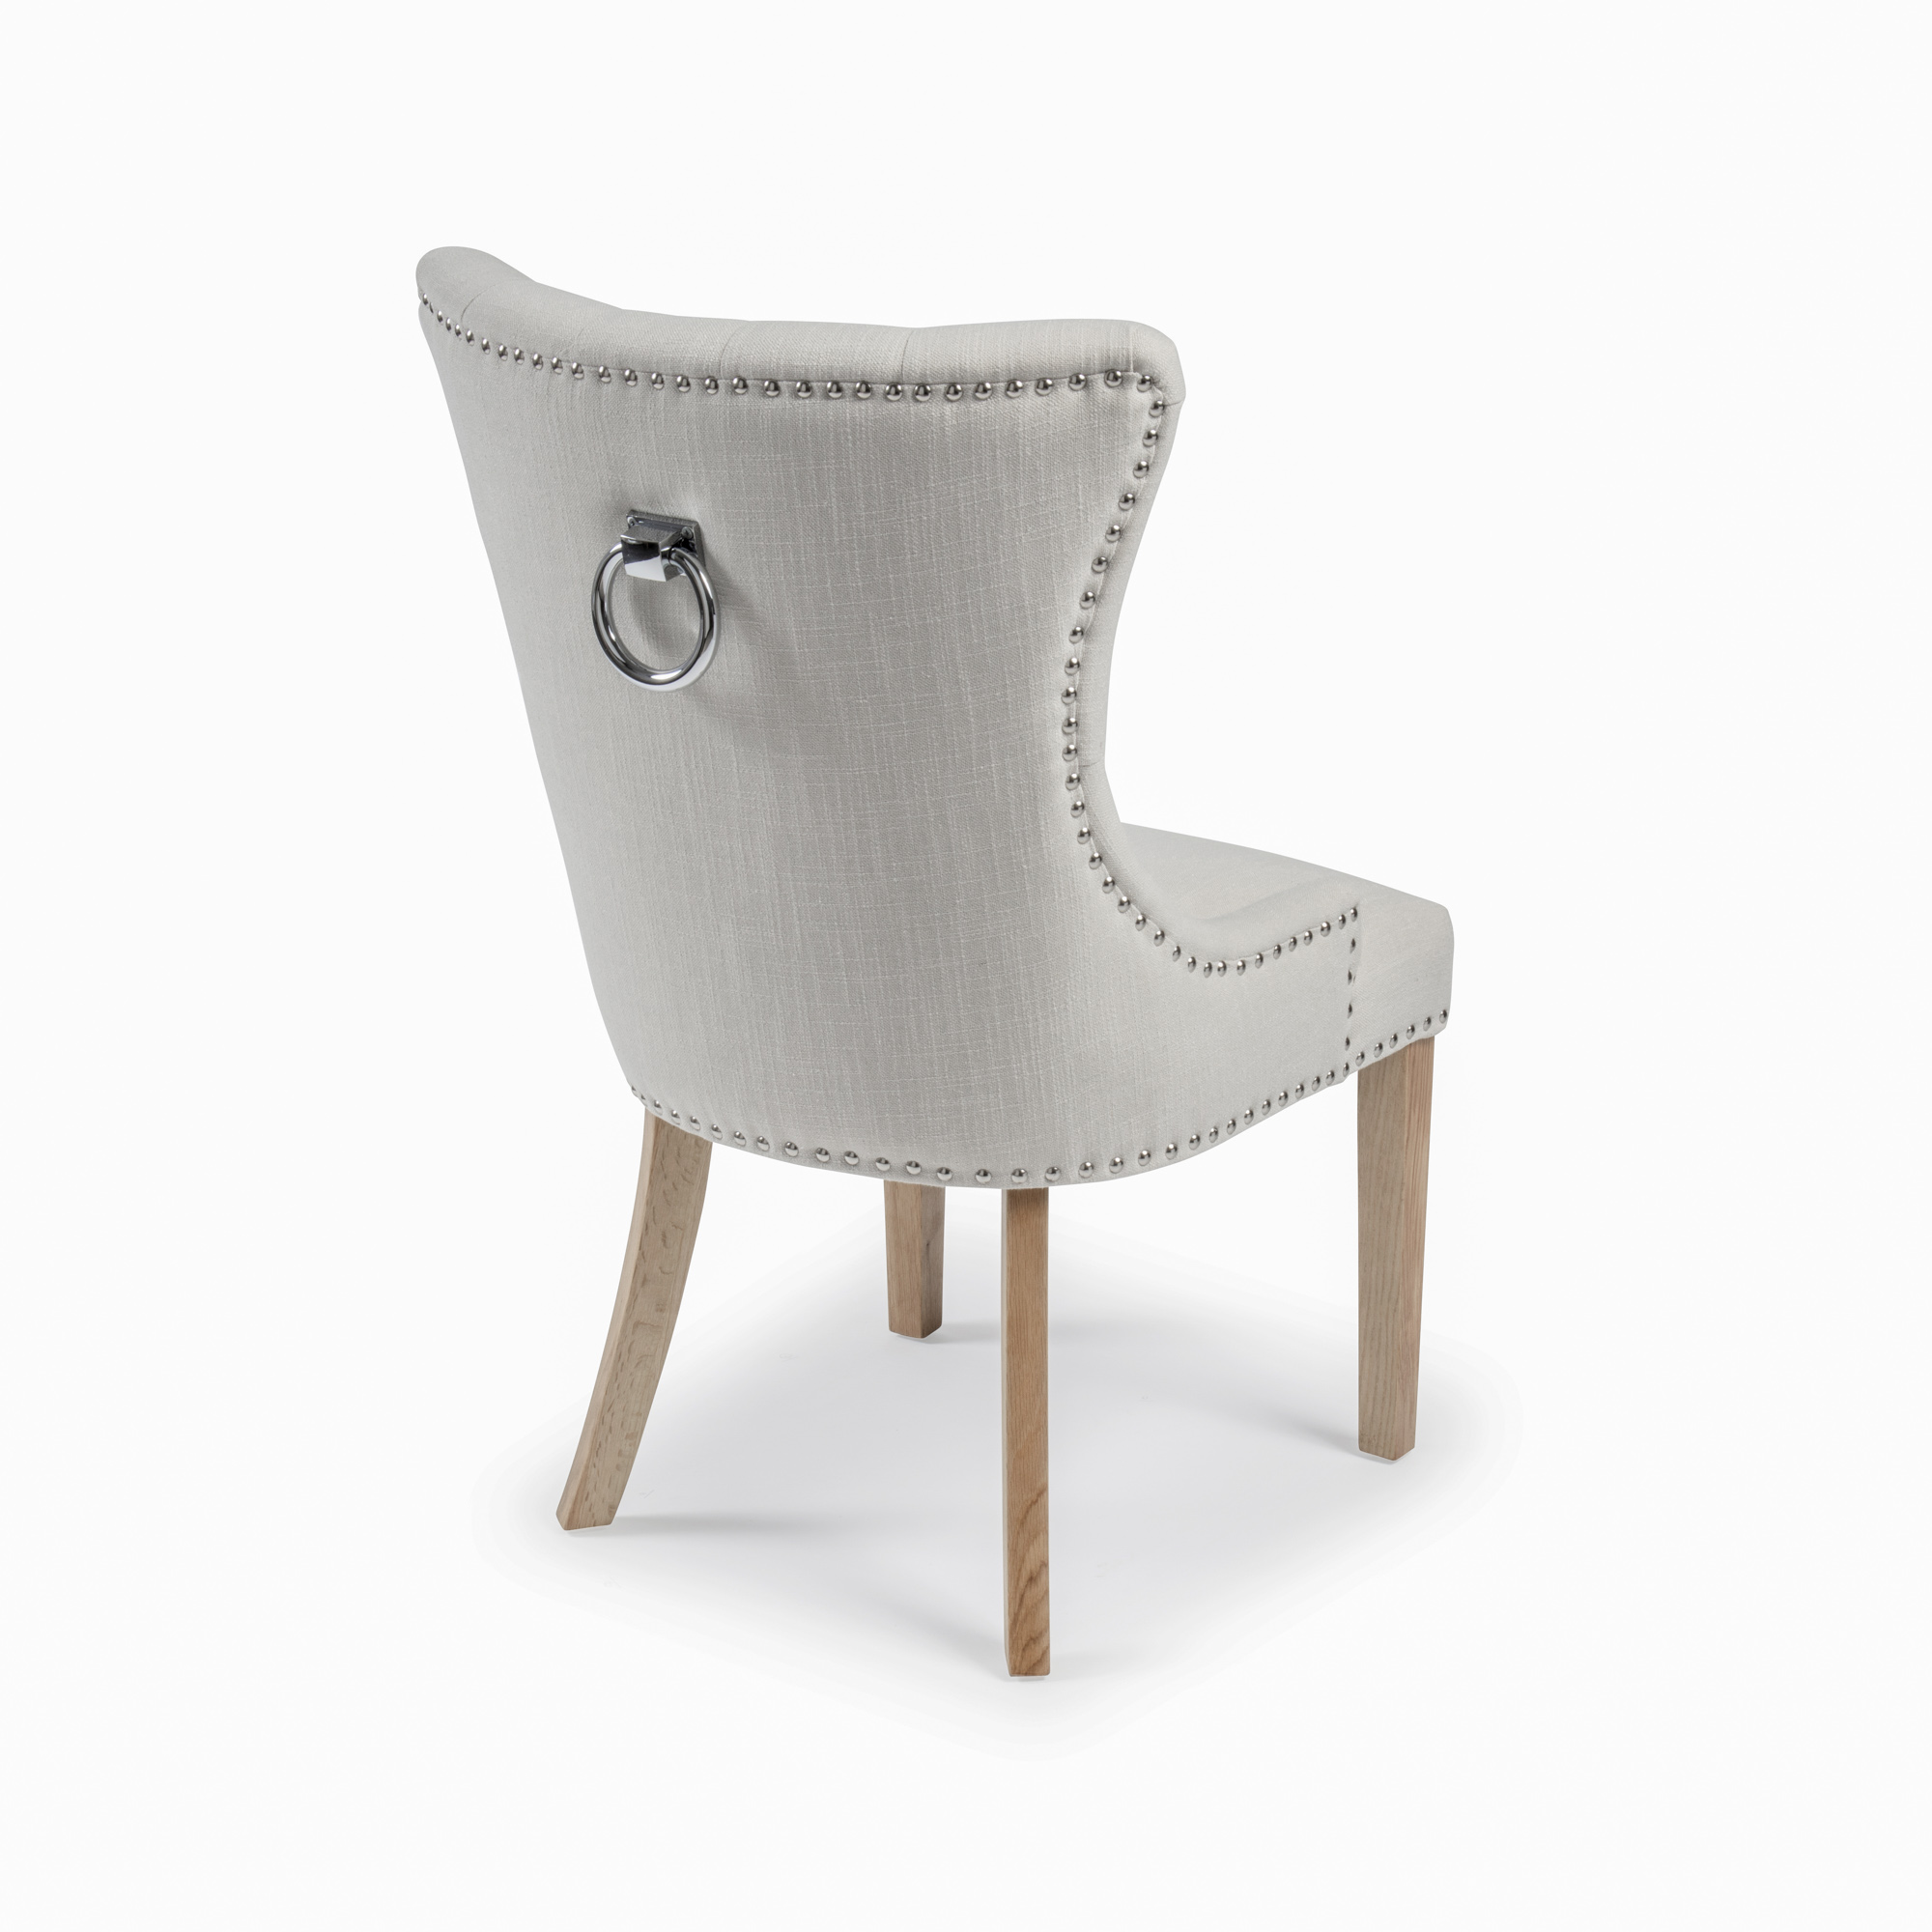 CLEARANCE: Knightsbridge Natural Linen Dining Chair with Hoop